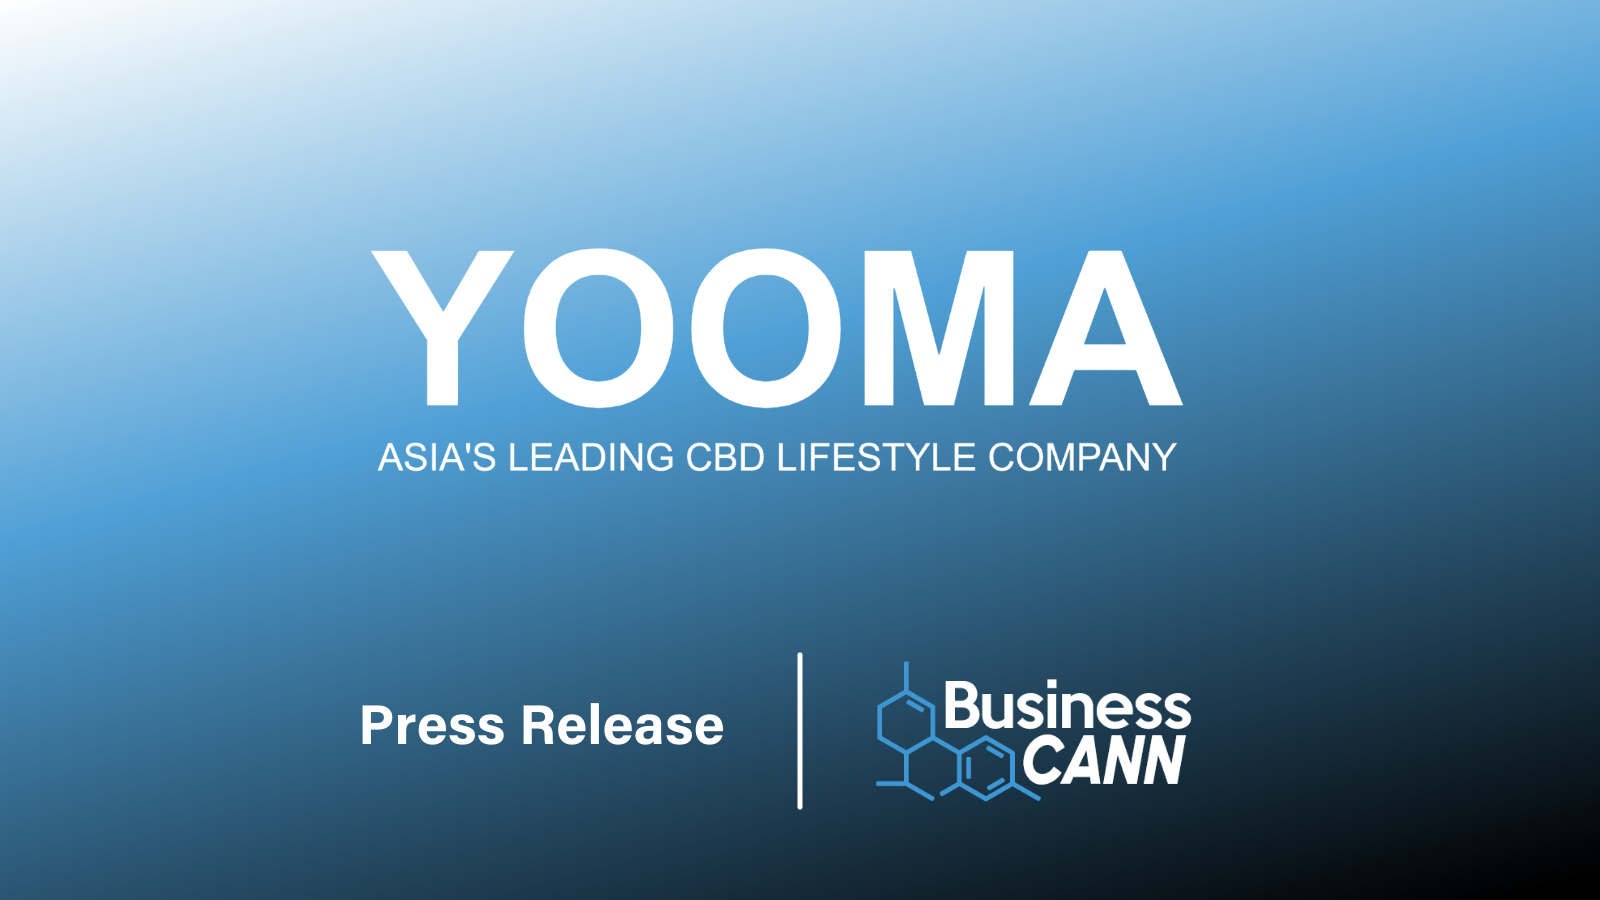 Yooma Wellness is pleased to announce eBay has added Vitality CBD, Blossom Skincare (’Blossom’) and MYO Plant Nutrition (‘MYO’) to its CBD pilot programme, marking a significant step forward for the global wellness market.